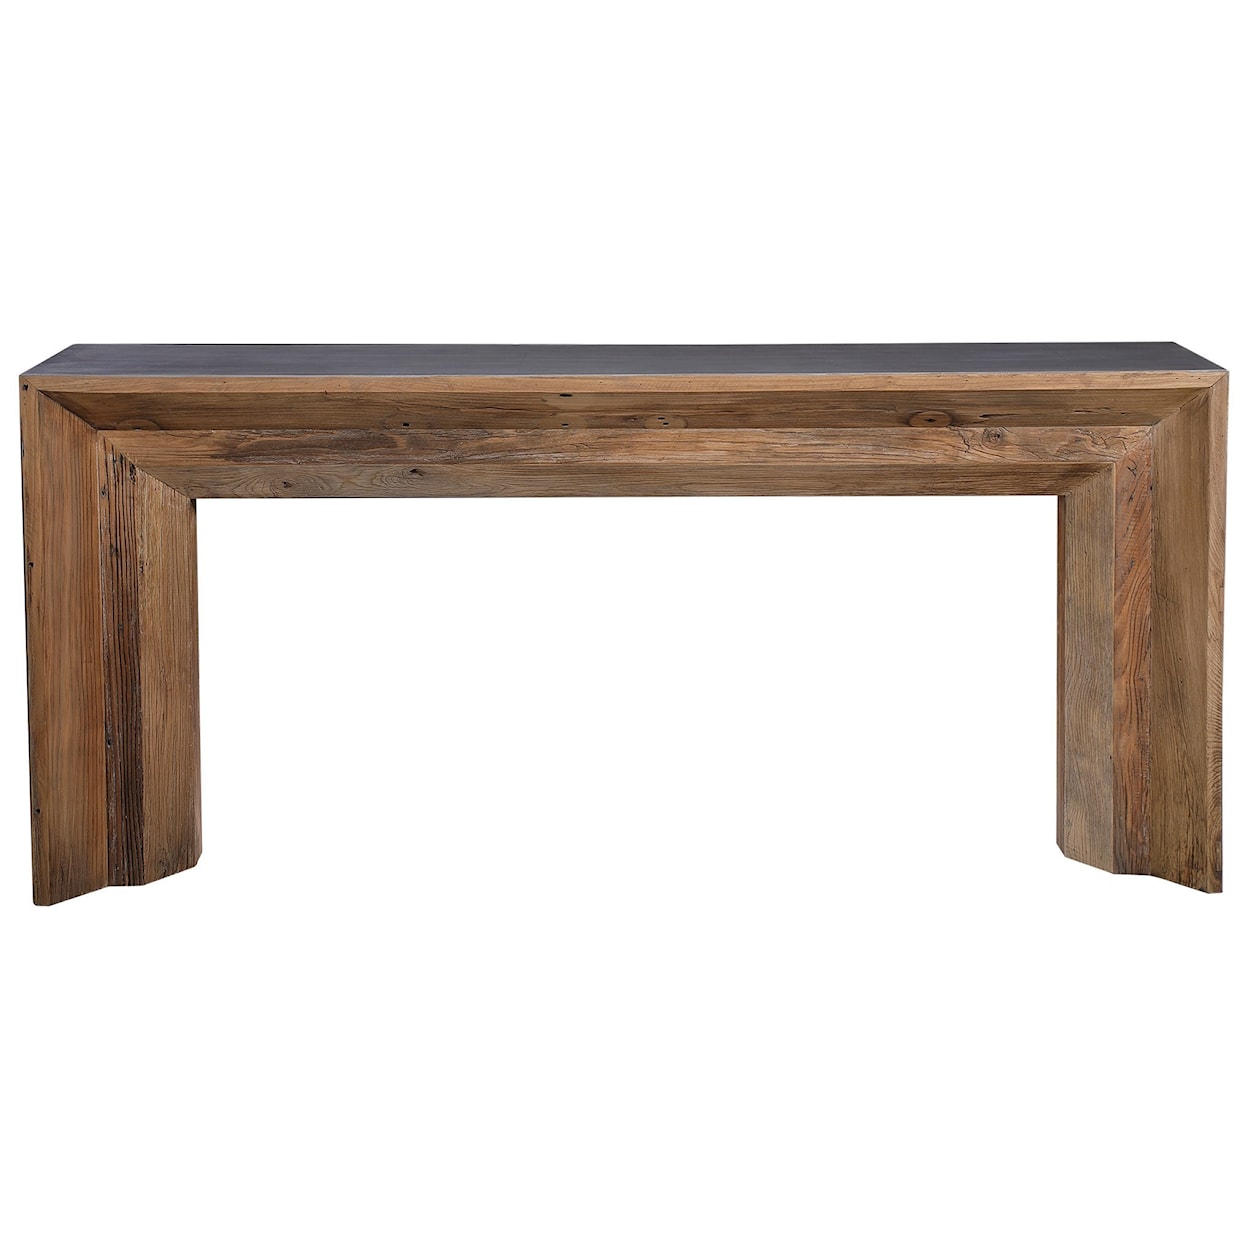 Uttermost Accent Furniture - Occasional Tables Vail Reclaimed Wood Console Table